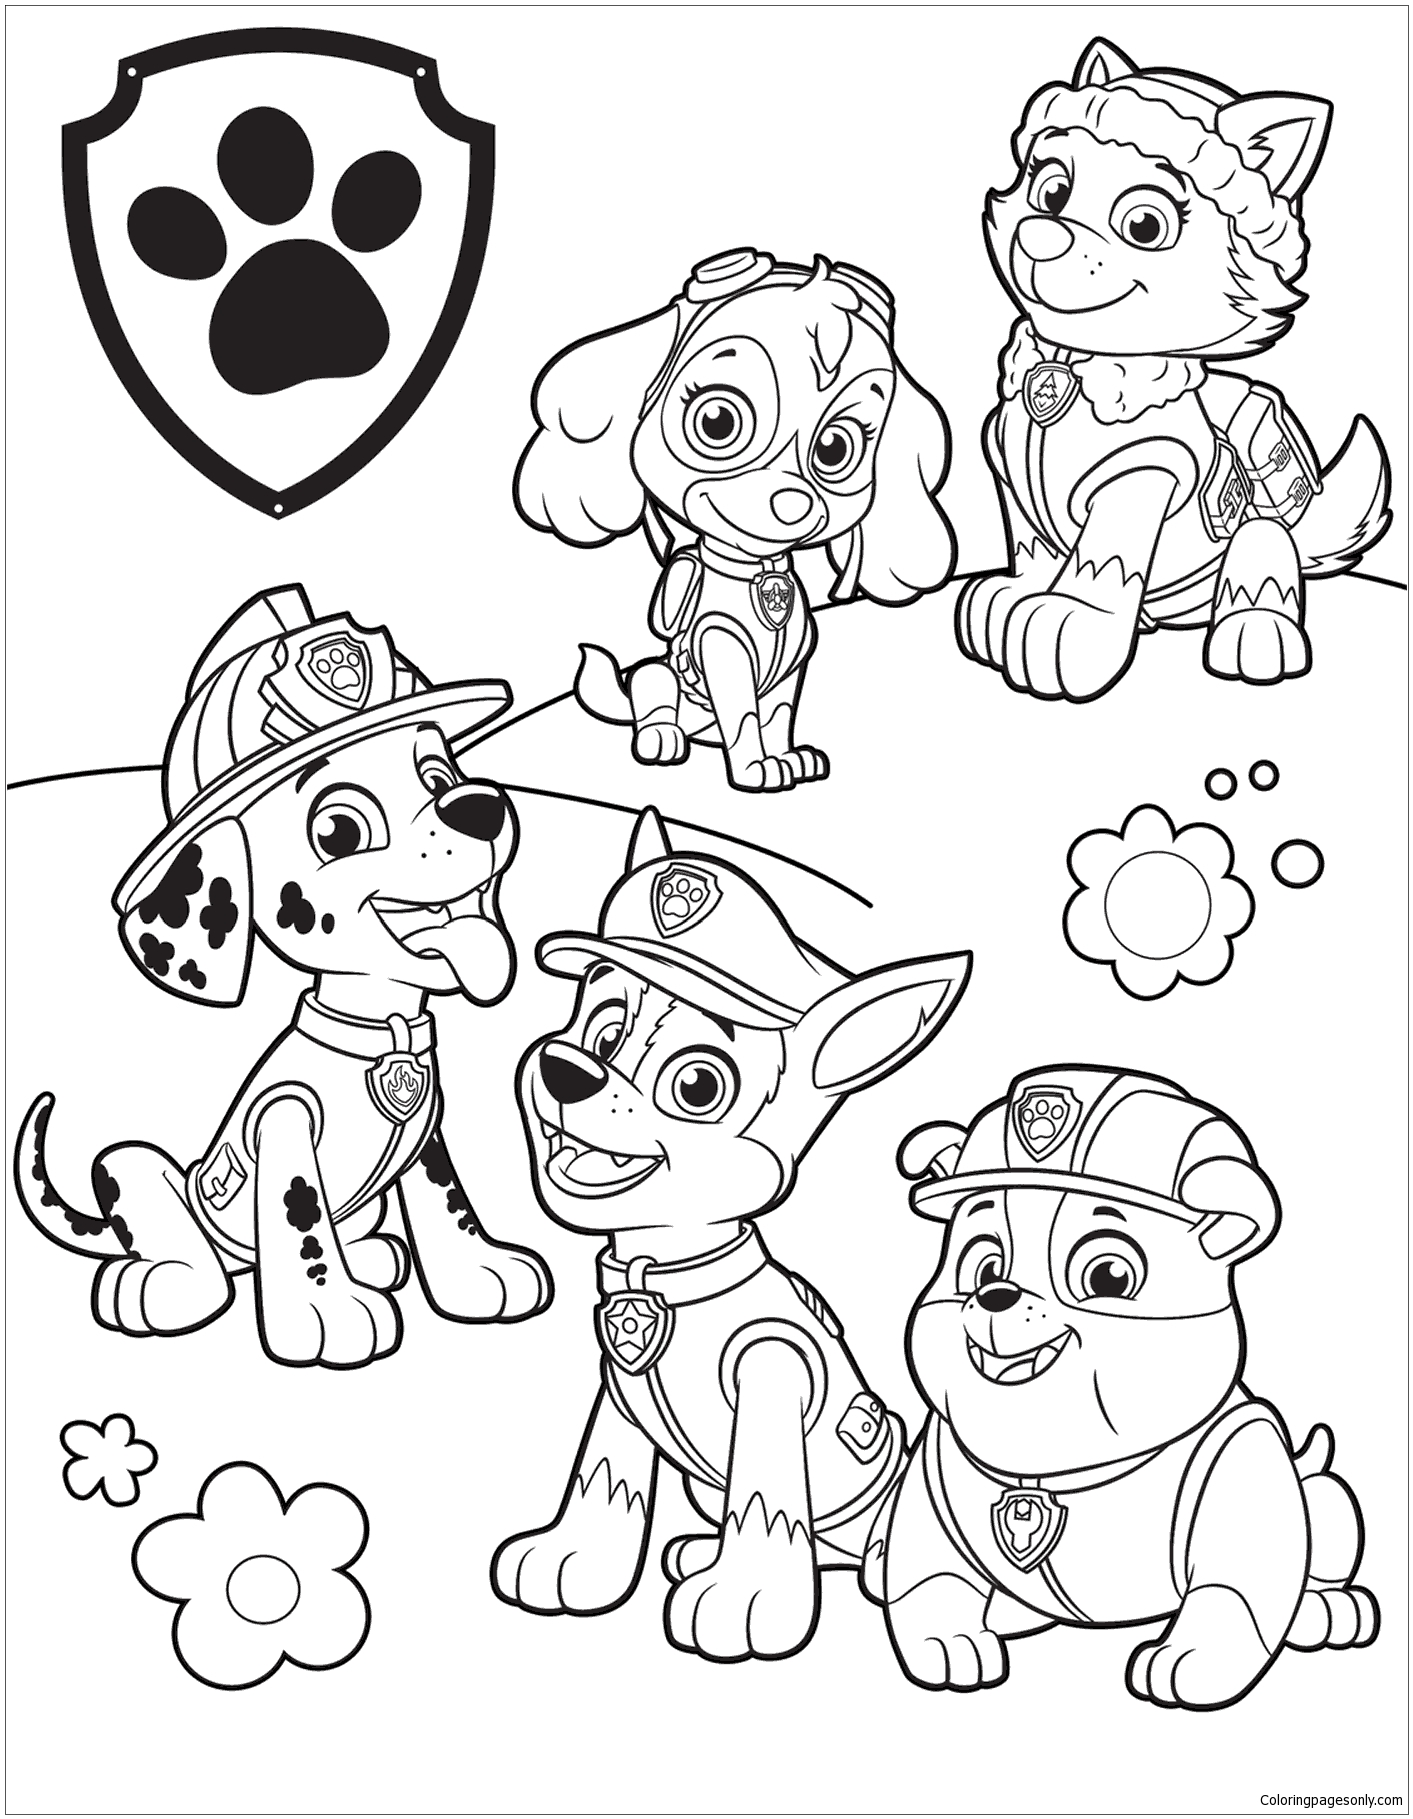 Coloring Pages Only An Online Coloring Website For People Of All ...